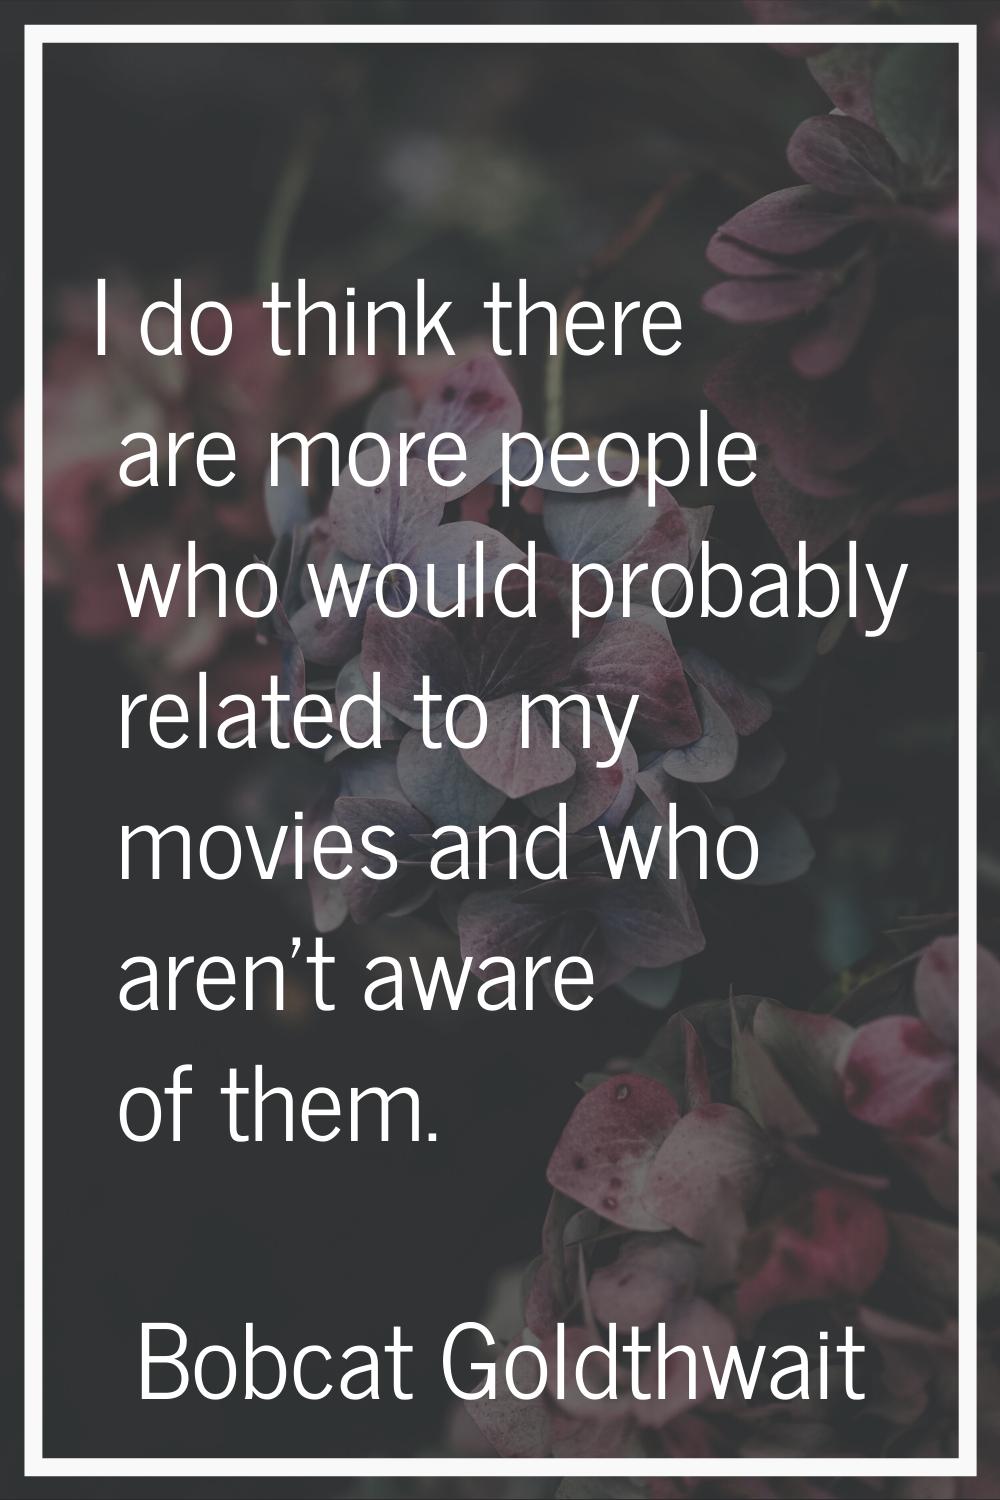 I do think there are more people who would probably related to my movies and who aren't aware of th